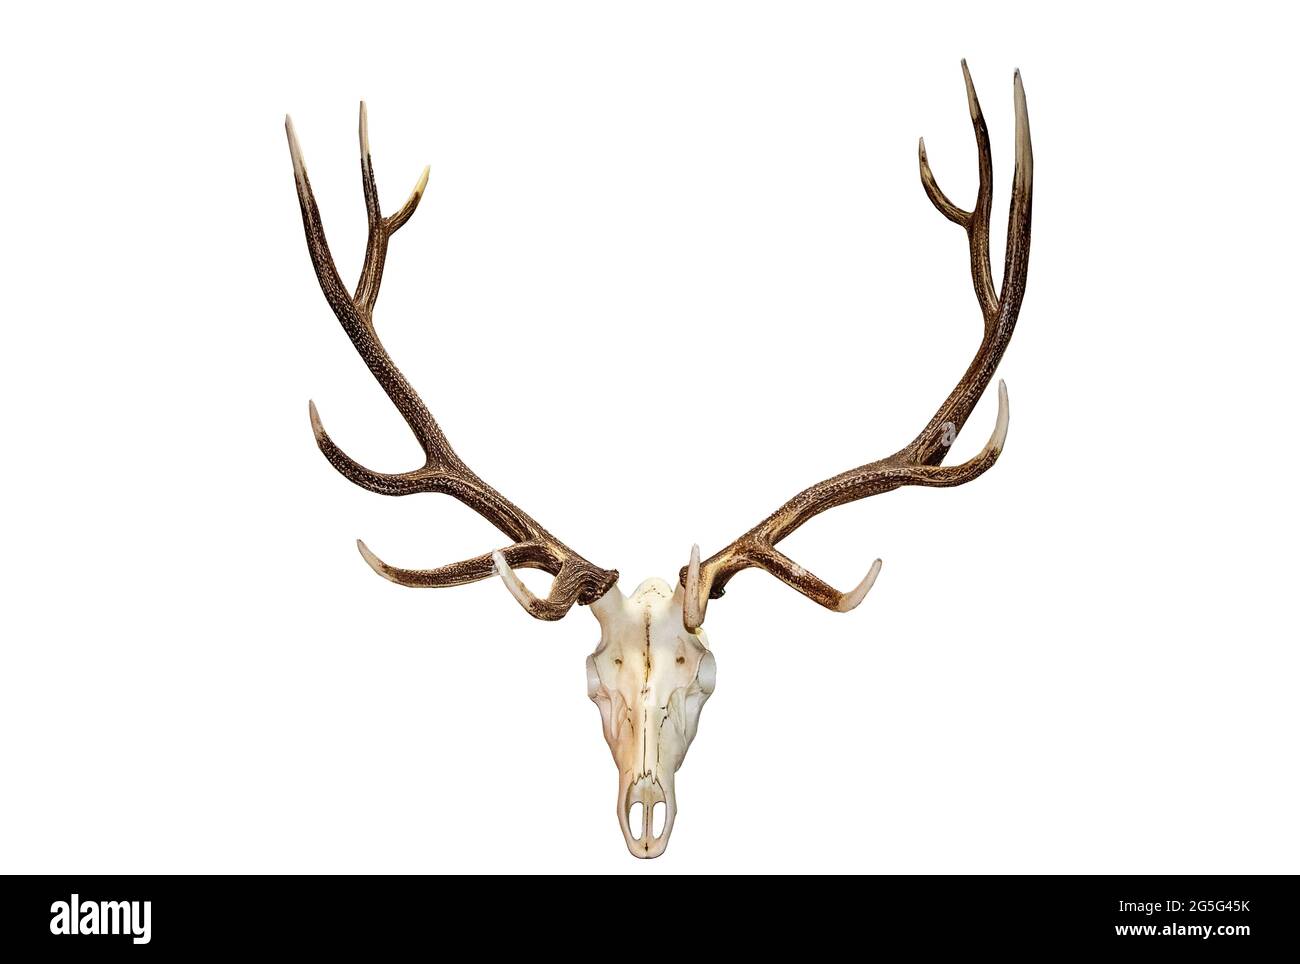 Beautiful Analope skull and antlers isolated against white. Stock Photo